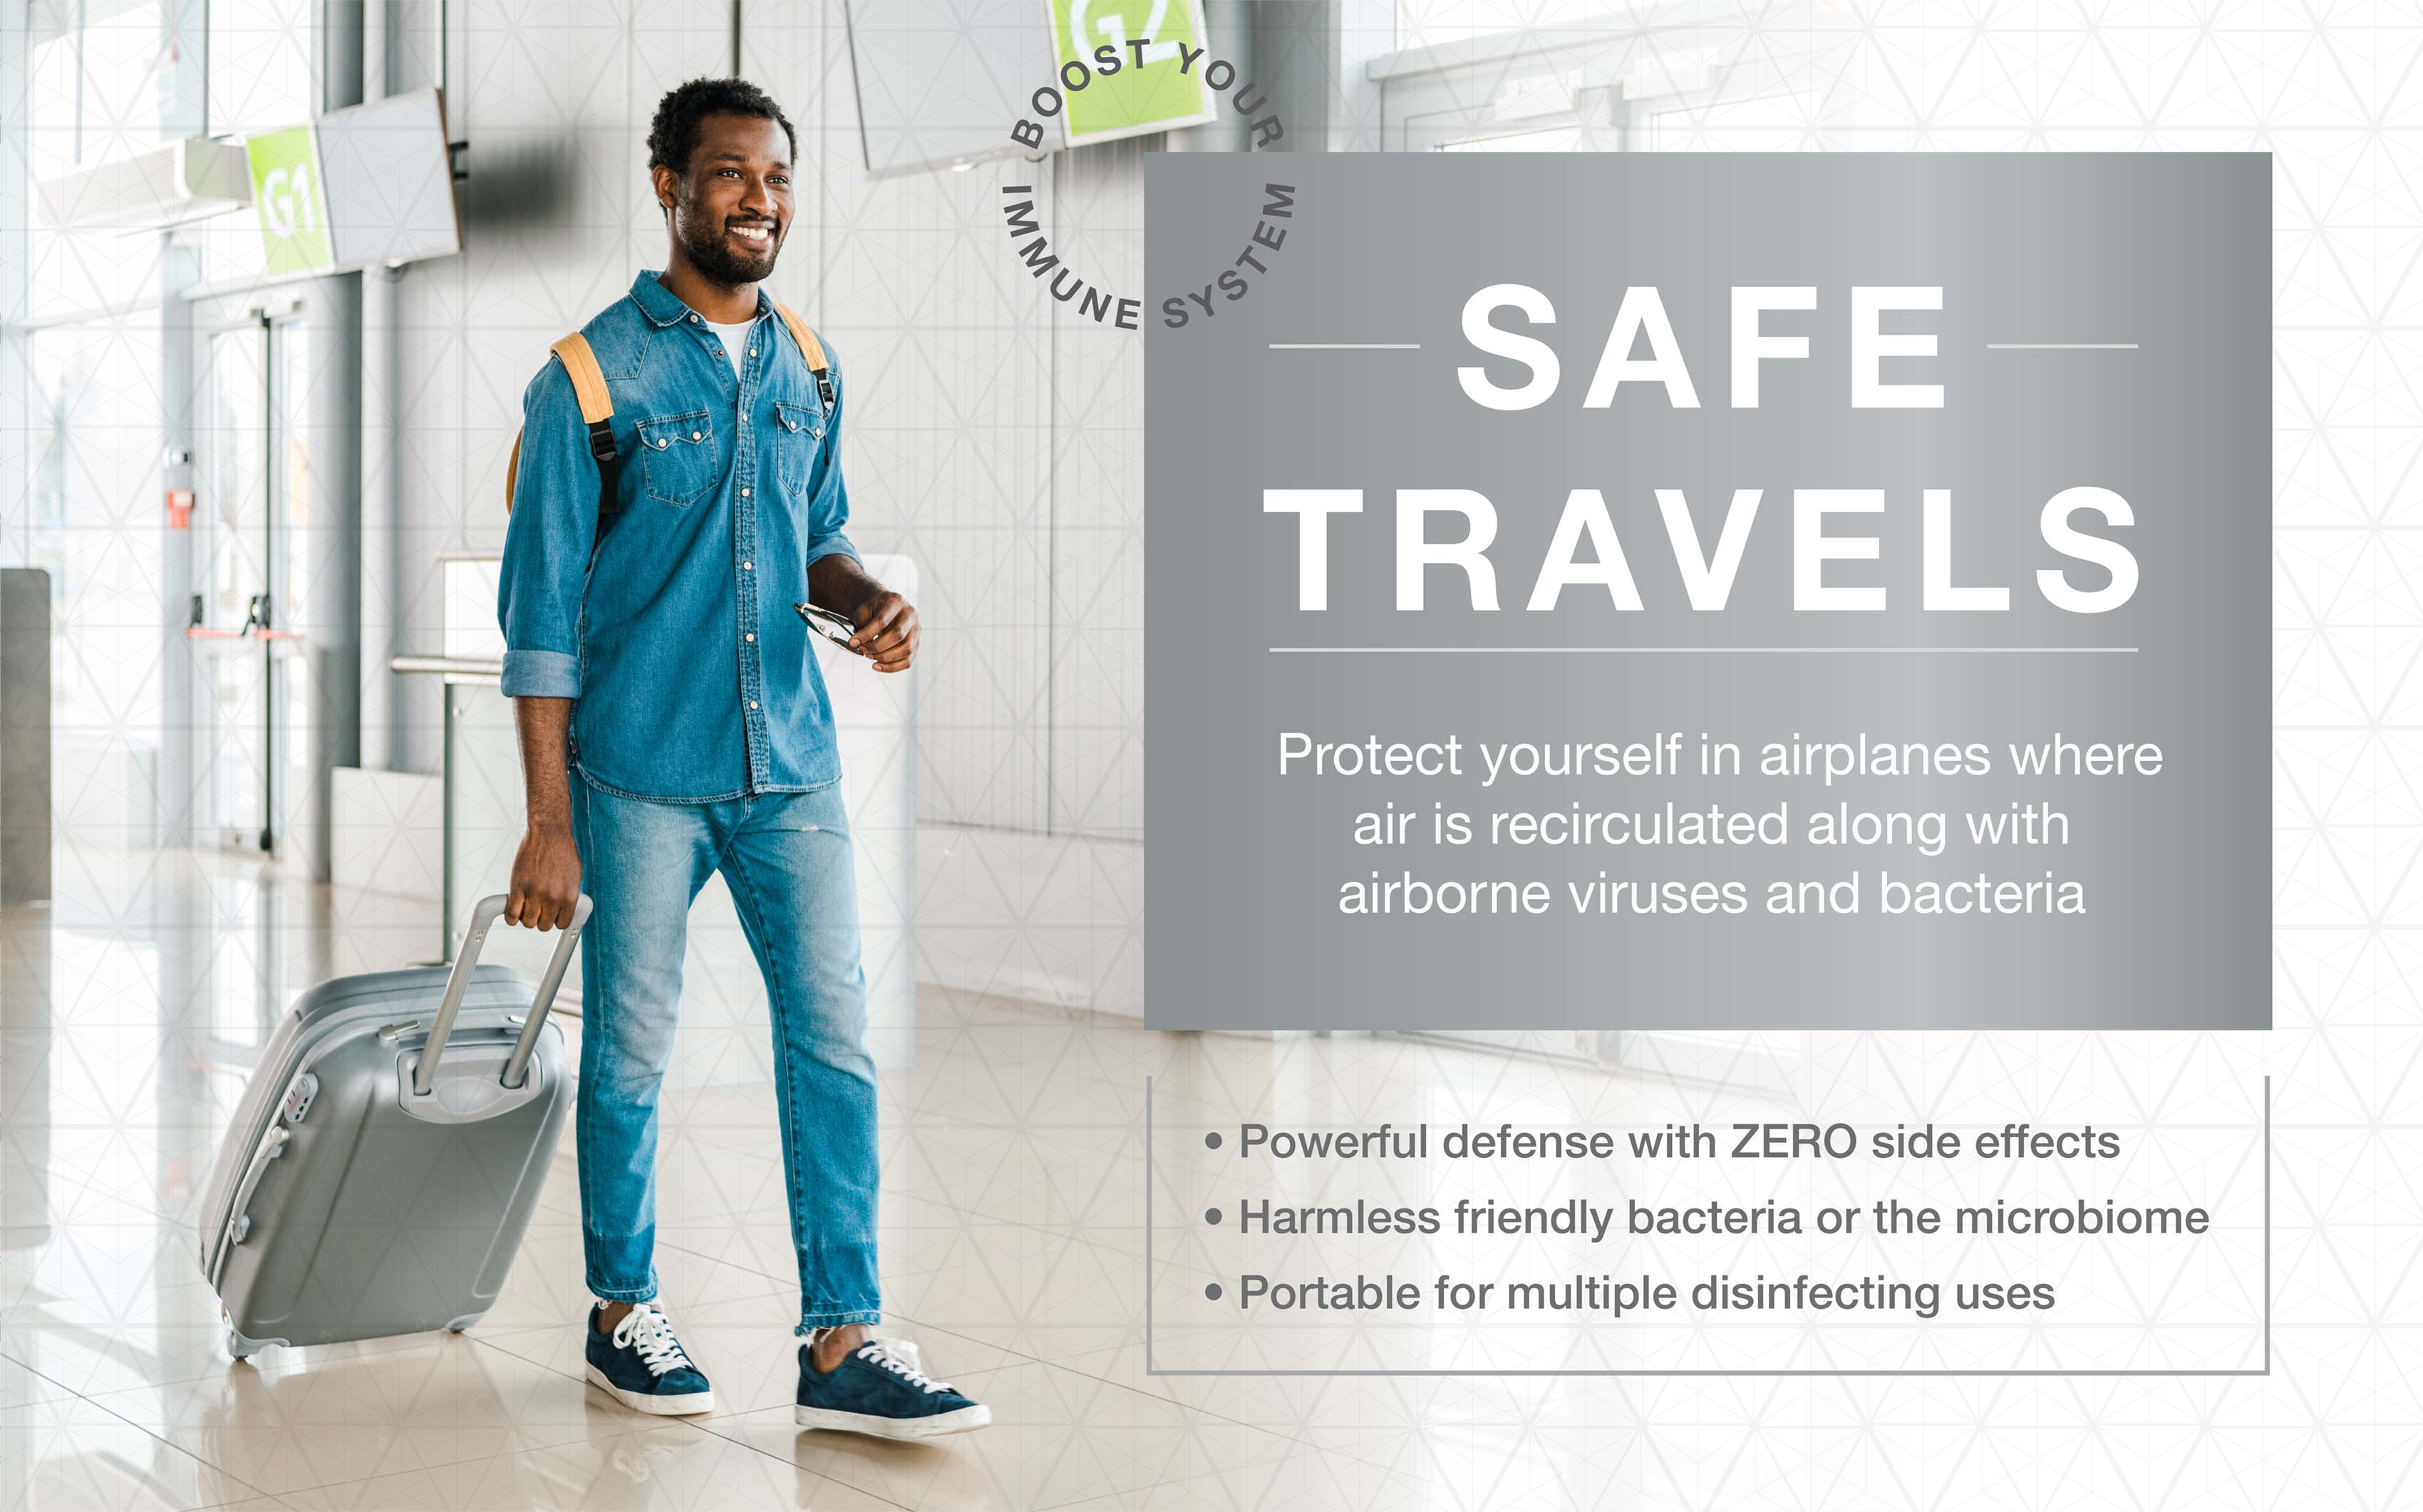 Protect yourself in airplanes where air is recirculated along airborne viruses and bacteria.